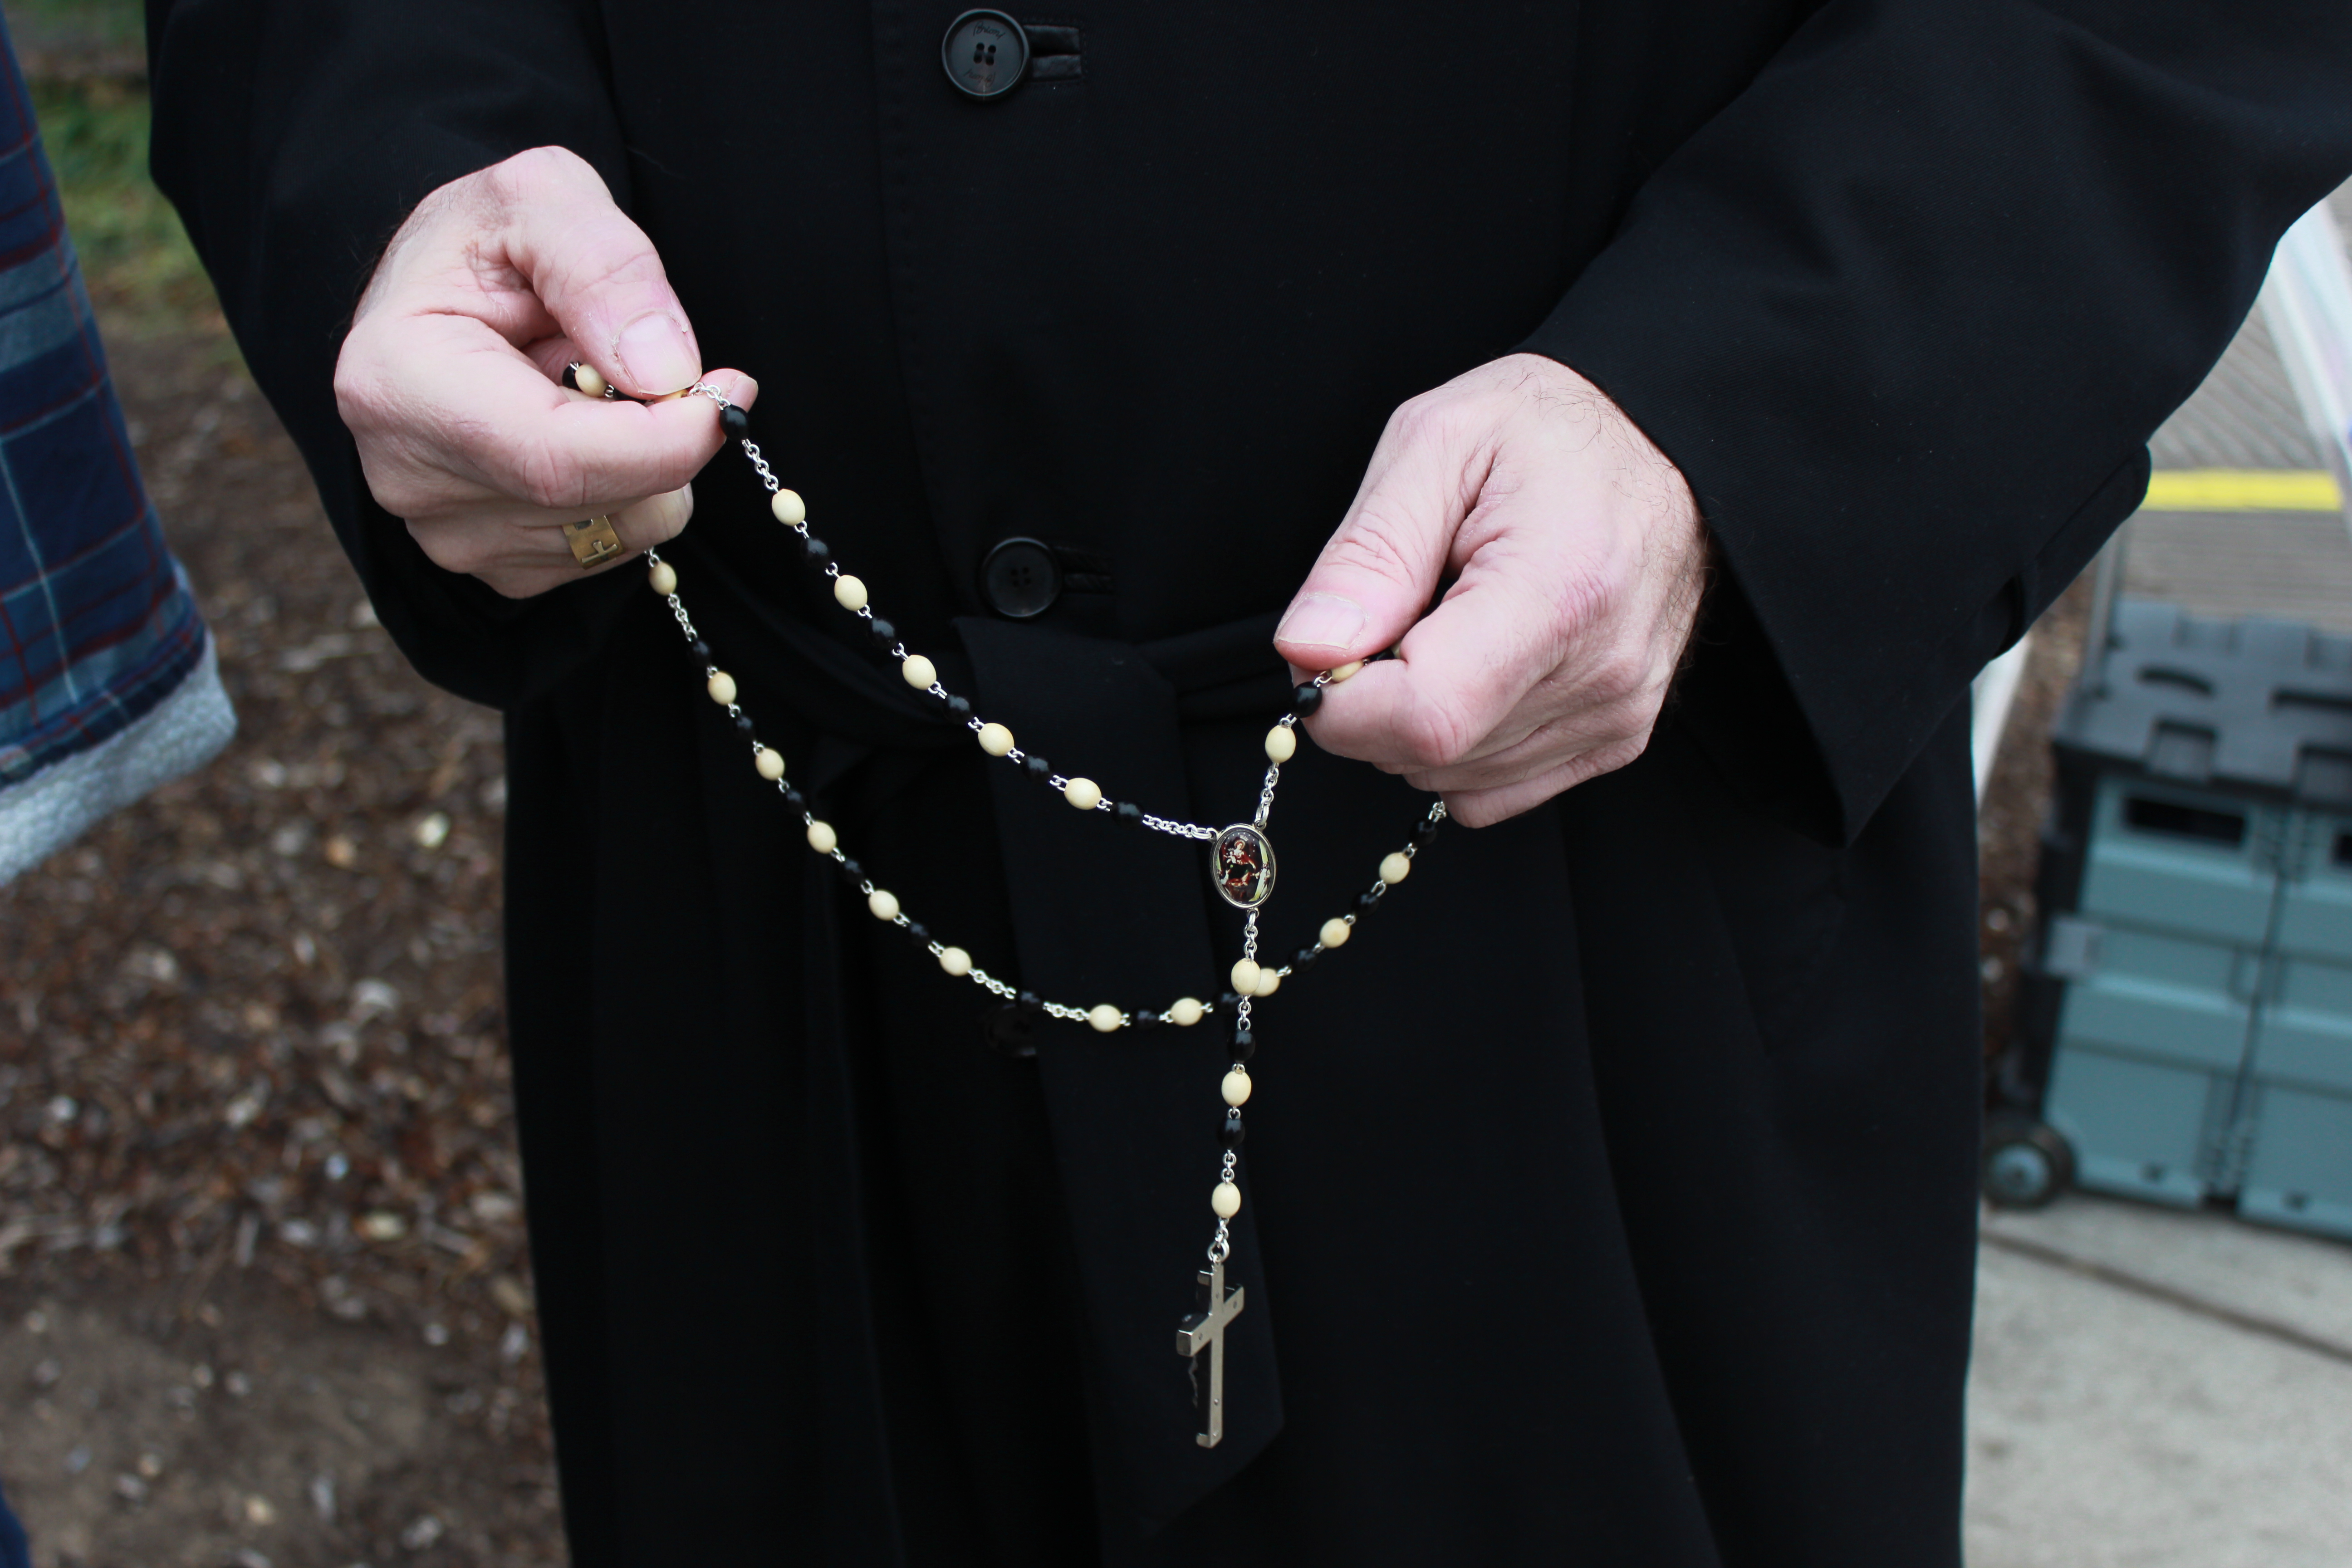 praying the rosary outside an abortion facility